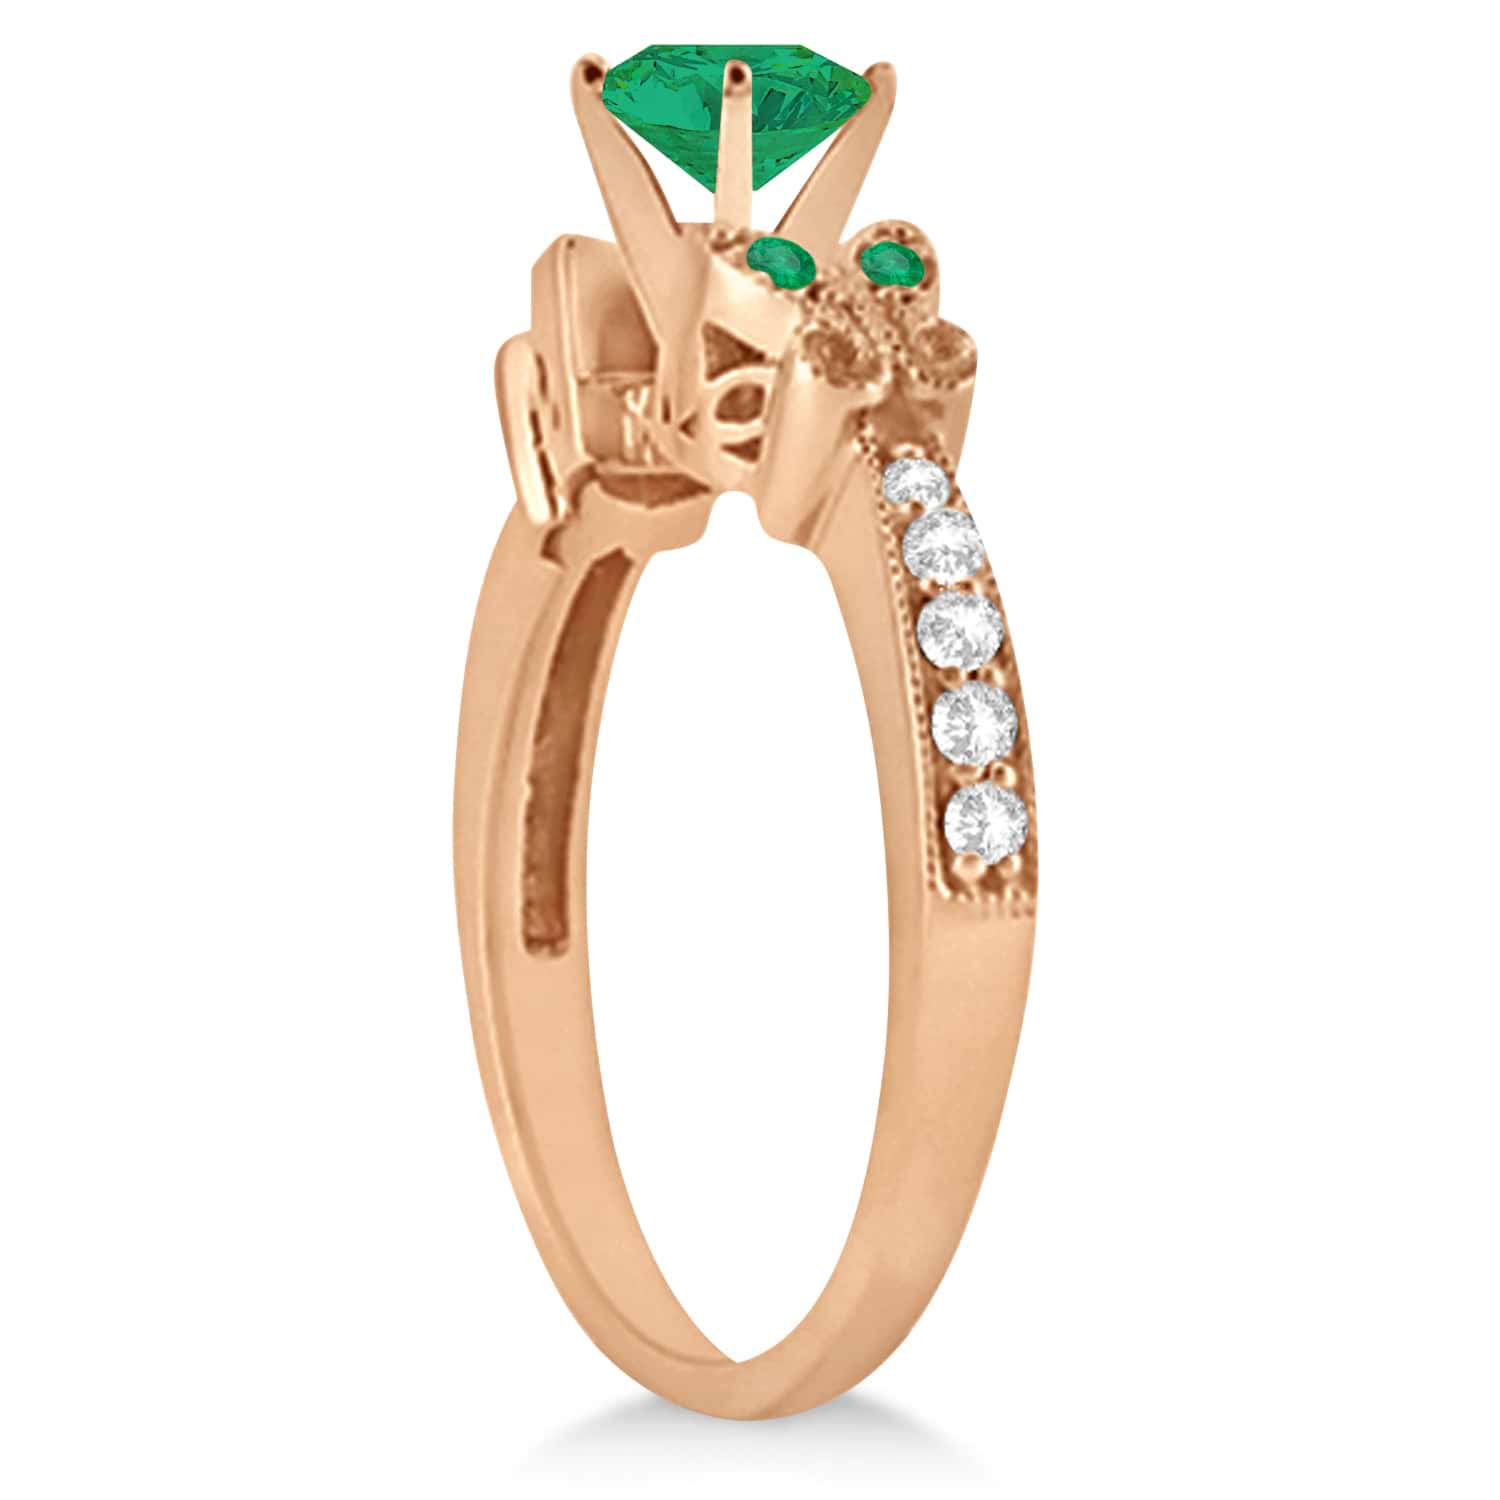 Butterfly Genuine Emerald & Diamond Engagement Ring 18K Rose Gold (1.91ct)